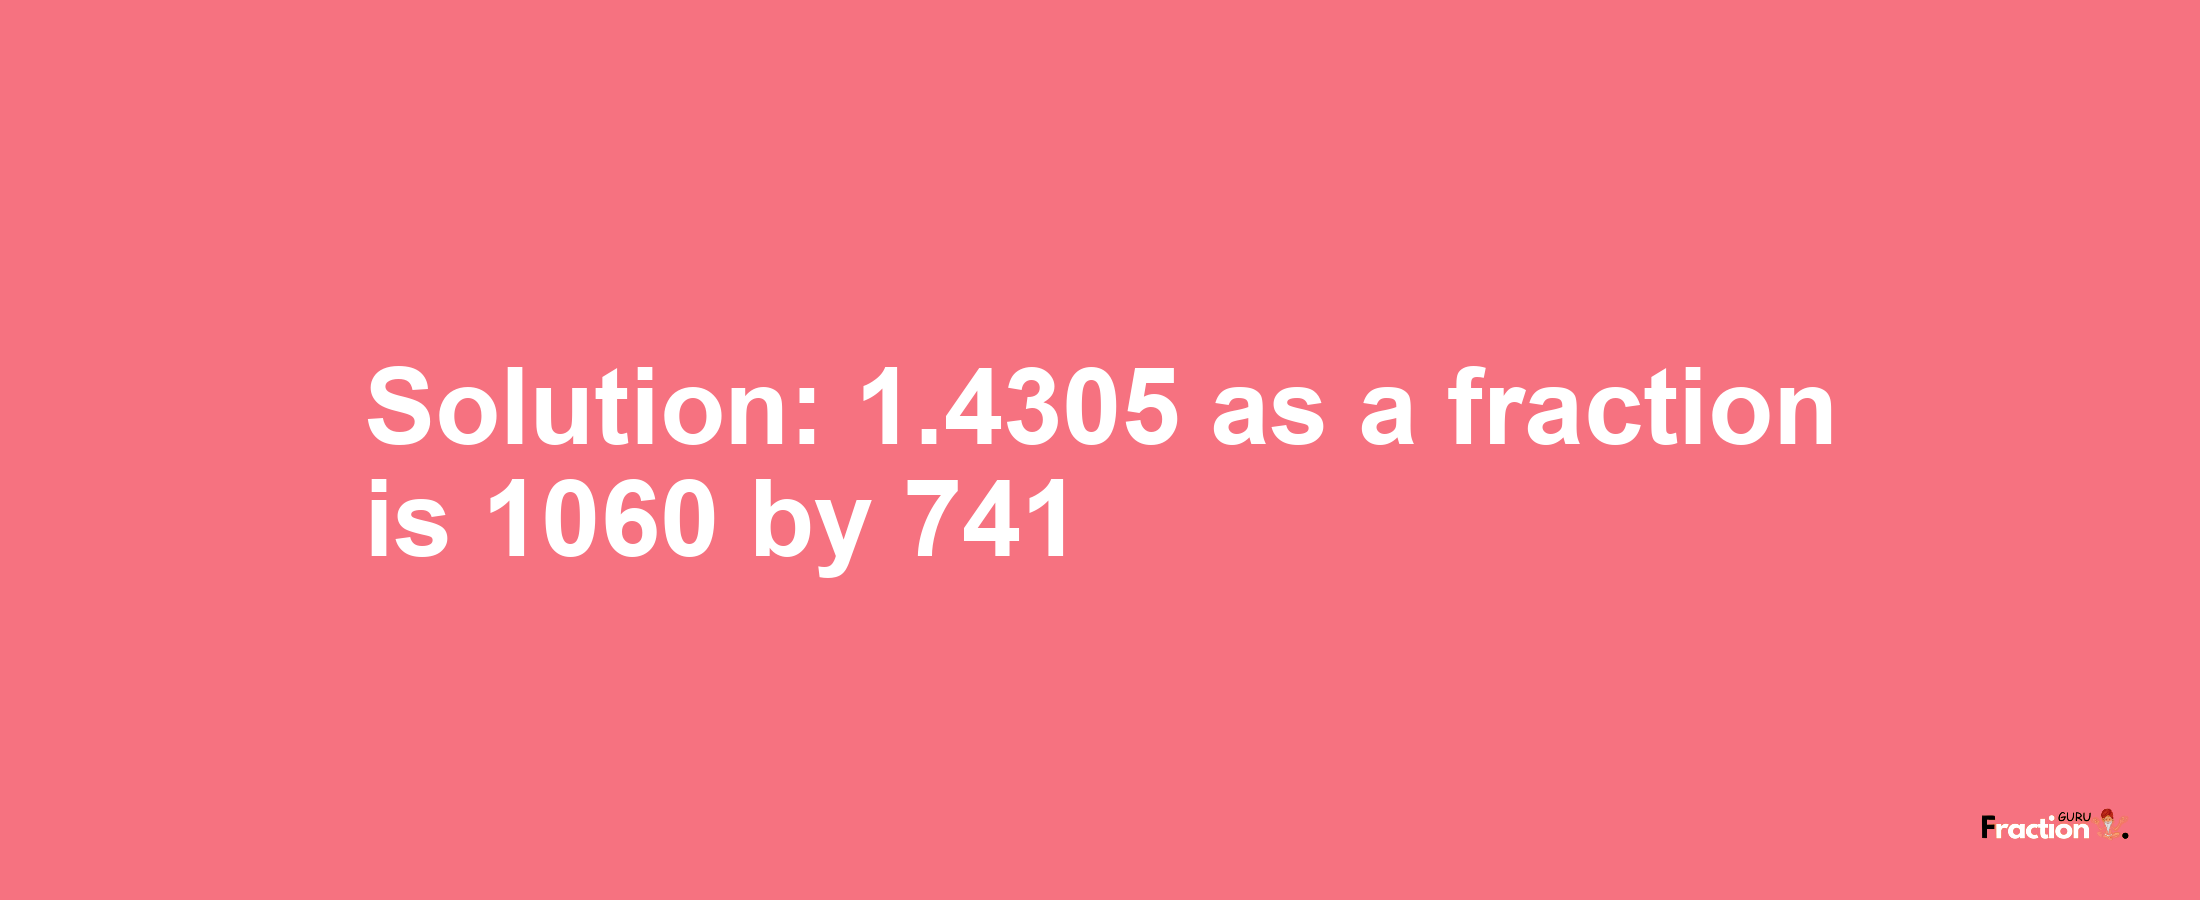 Solution:1.4305 as a fraction is 1060/741